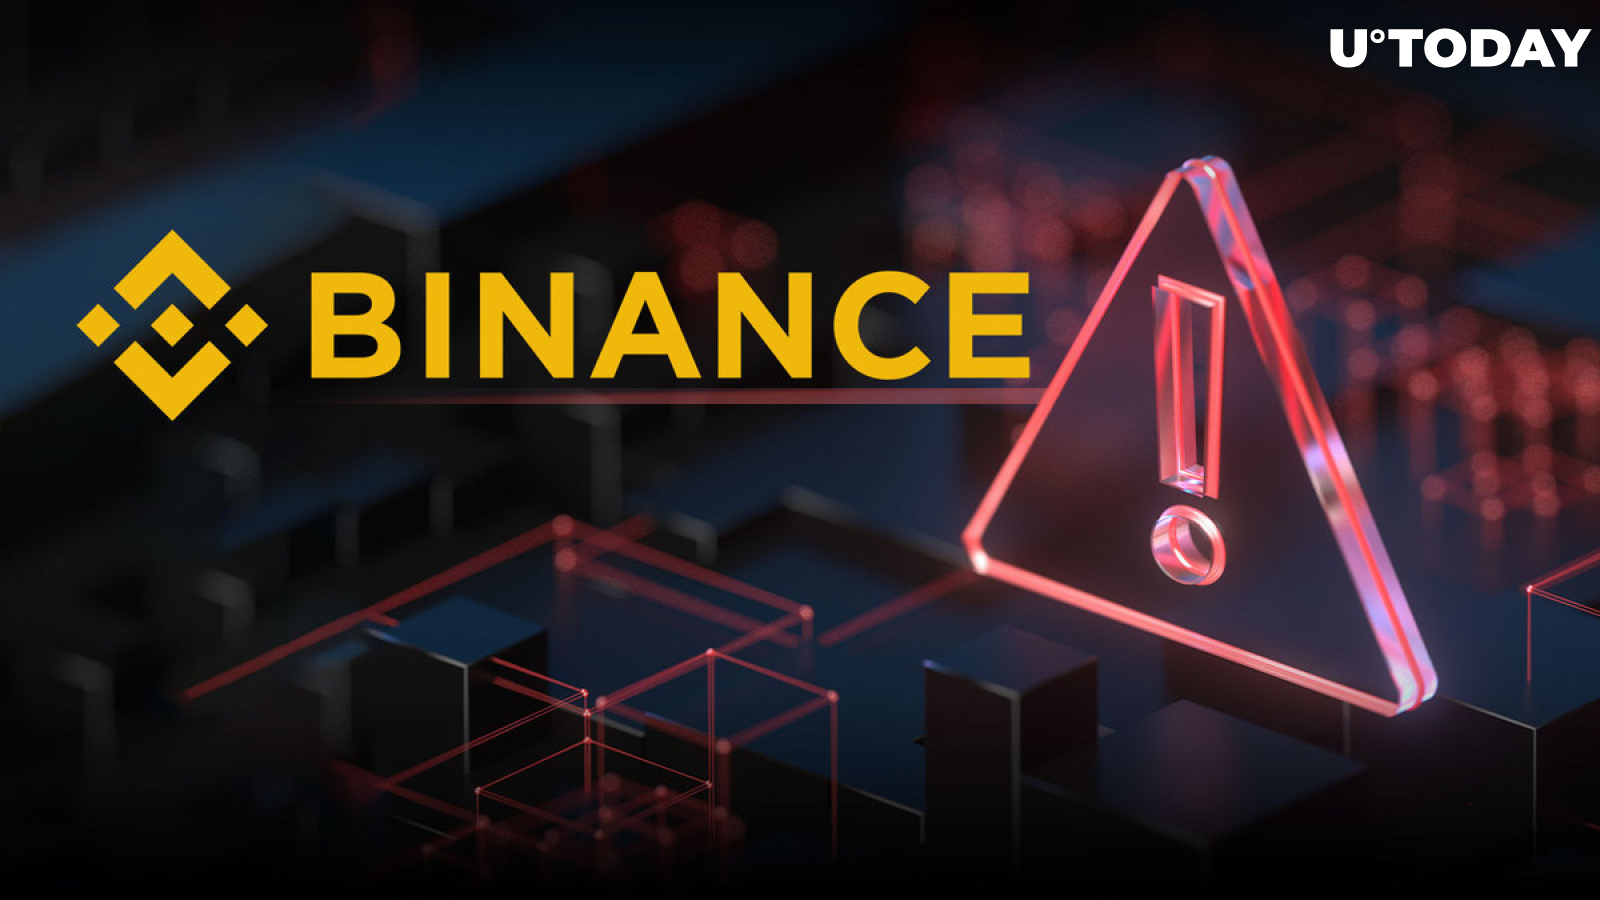 Binance Issues Critical Security Warning in Wake of Recent Incident